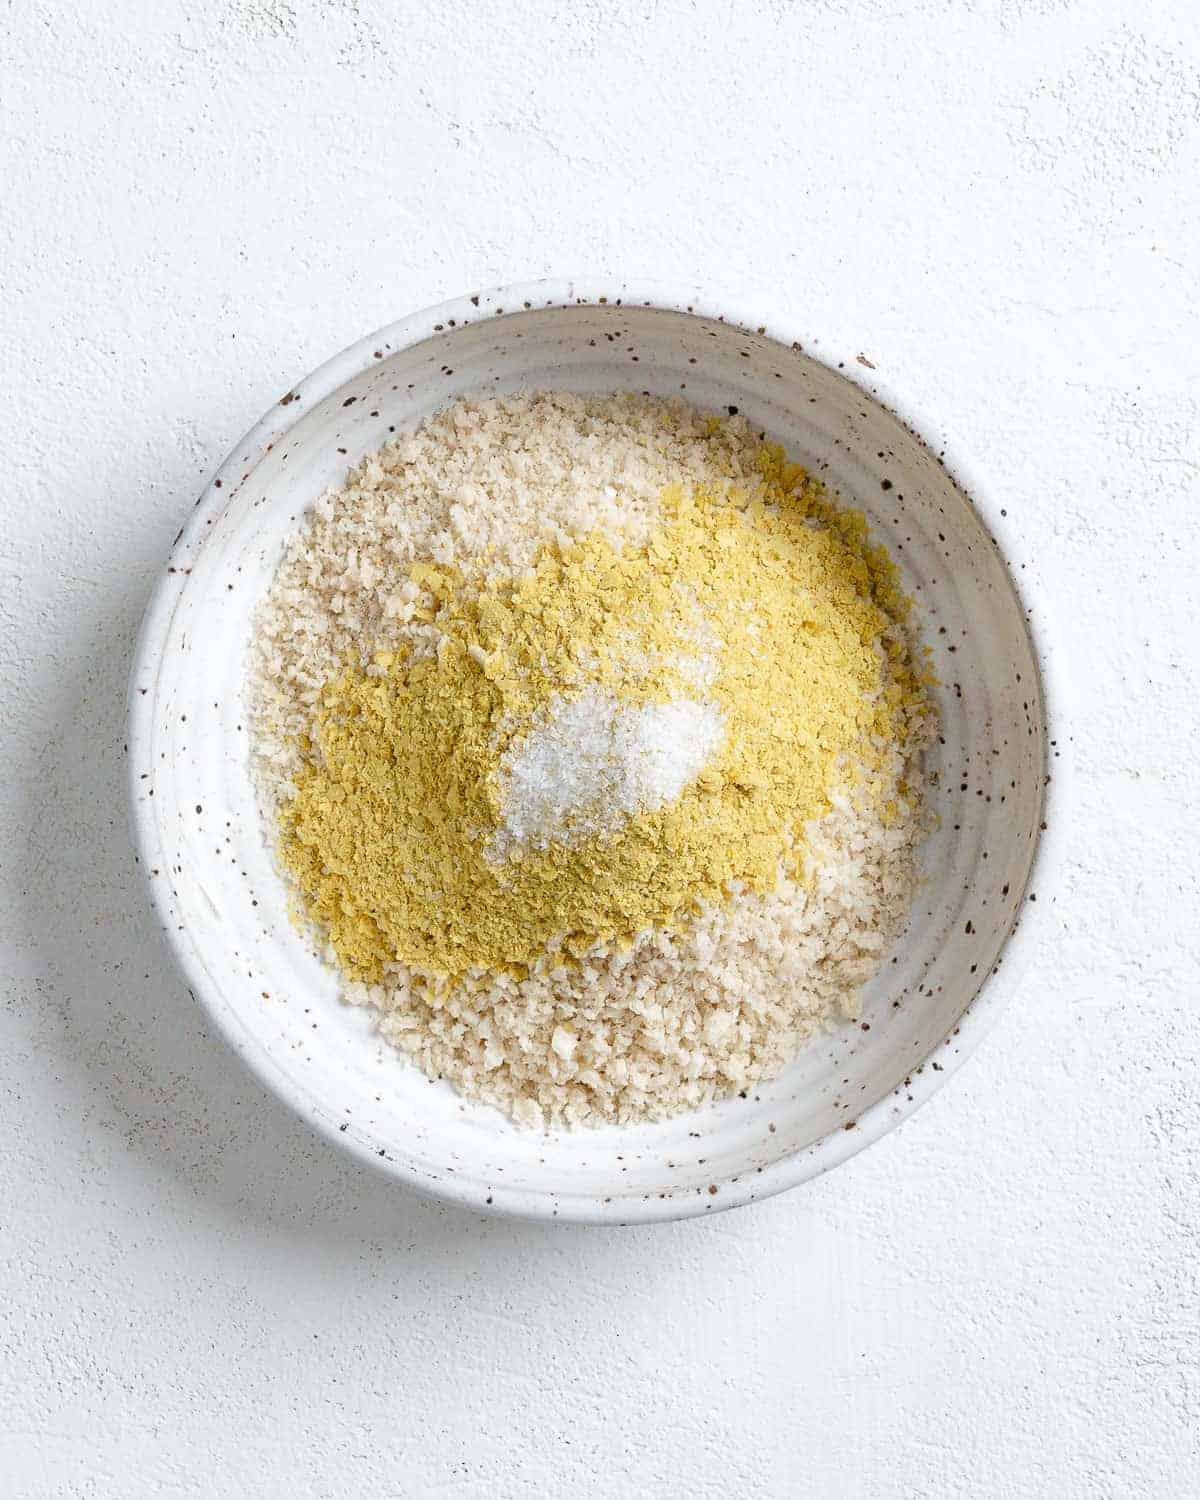 process of mixing breaded ingredients into white bowl against white background